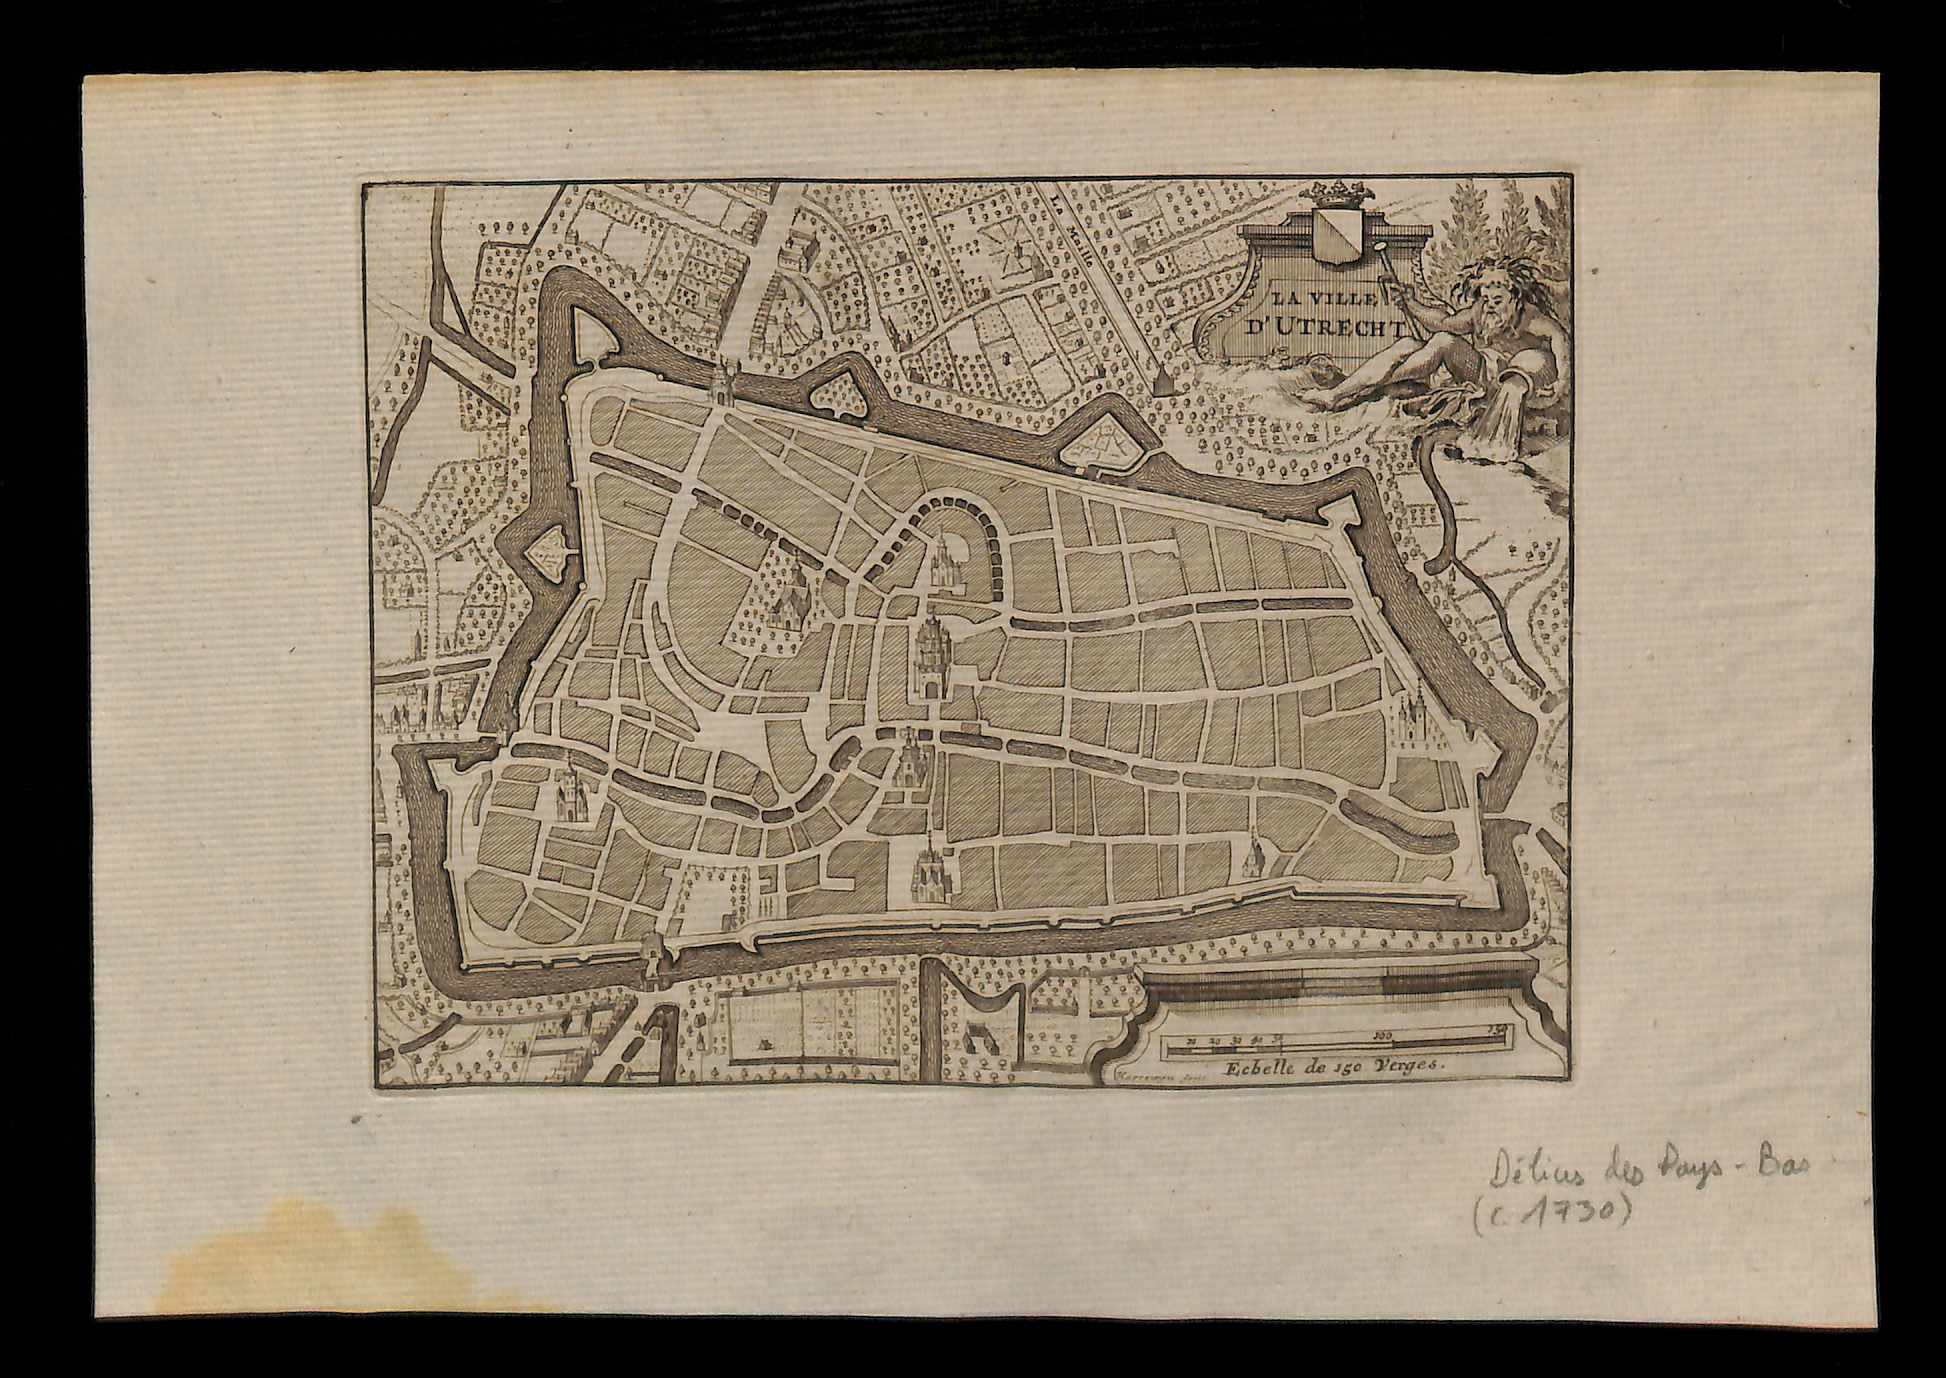 VIEW PLAN map OF THE CITY OF URECHT Original engraving from the Netherlands 1769 